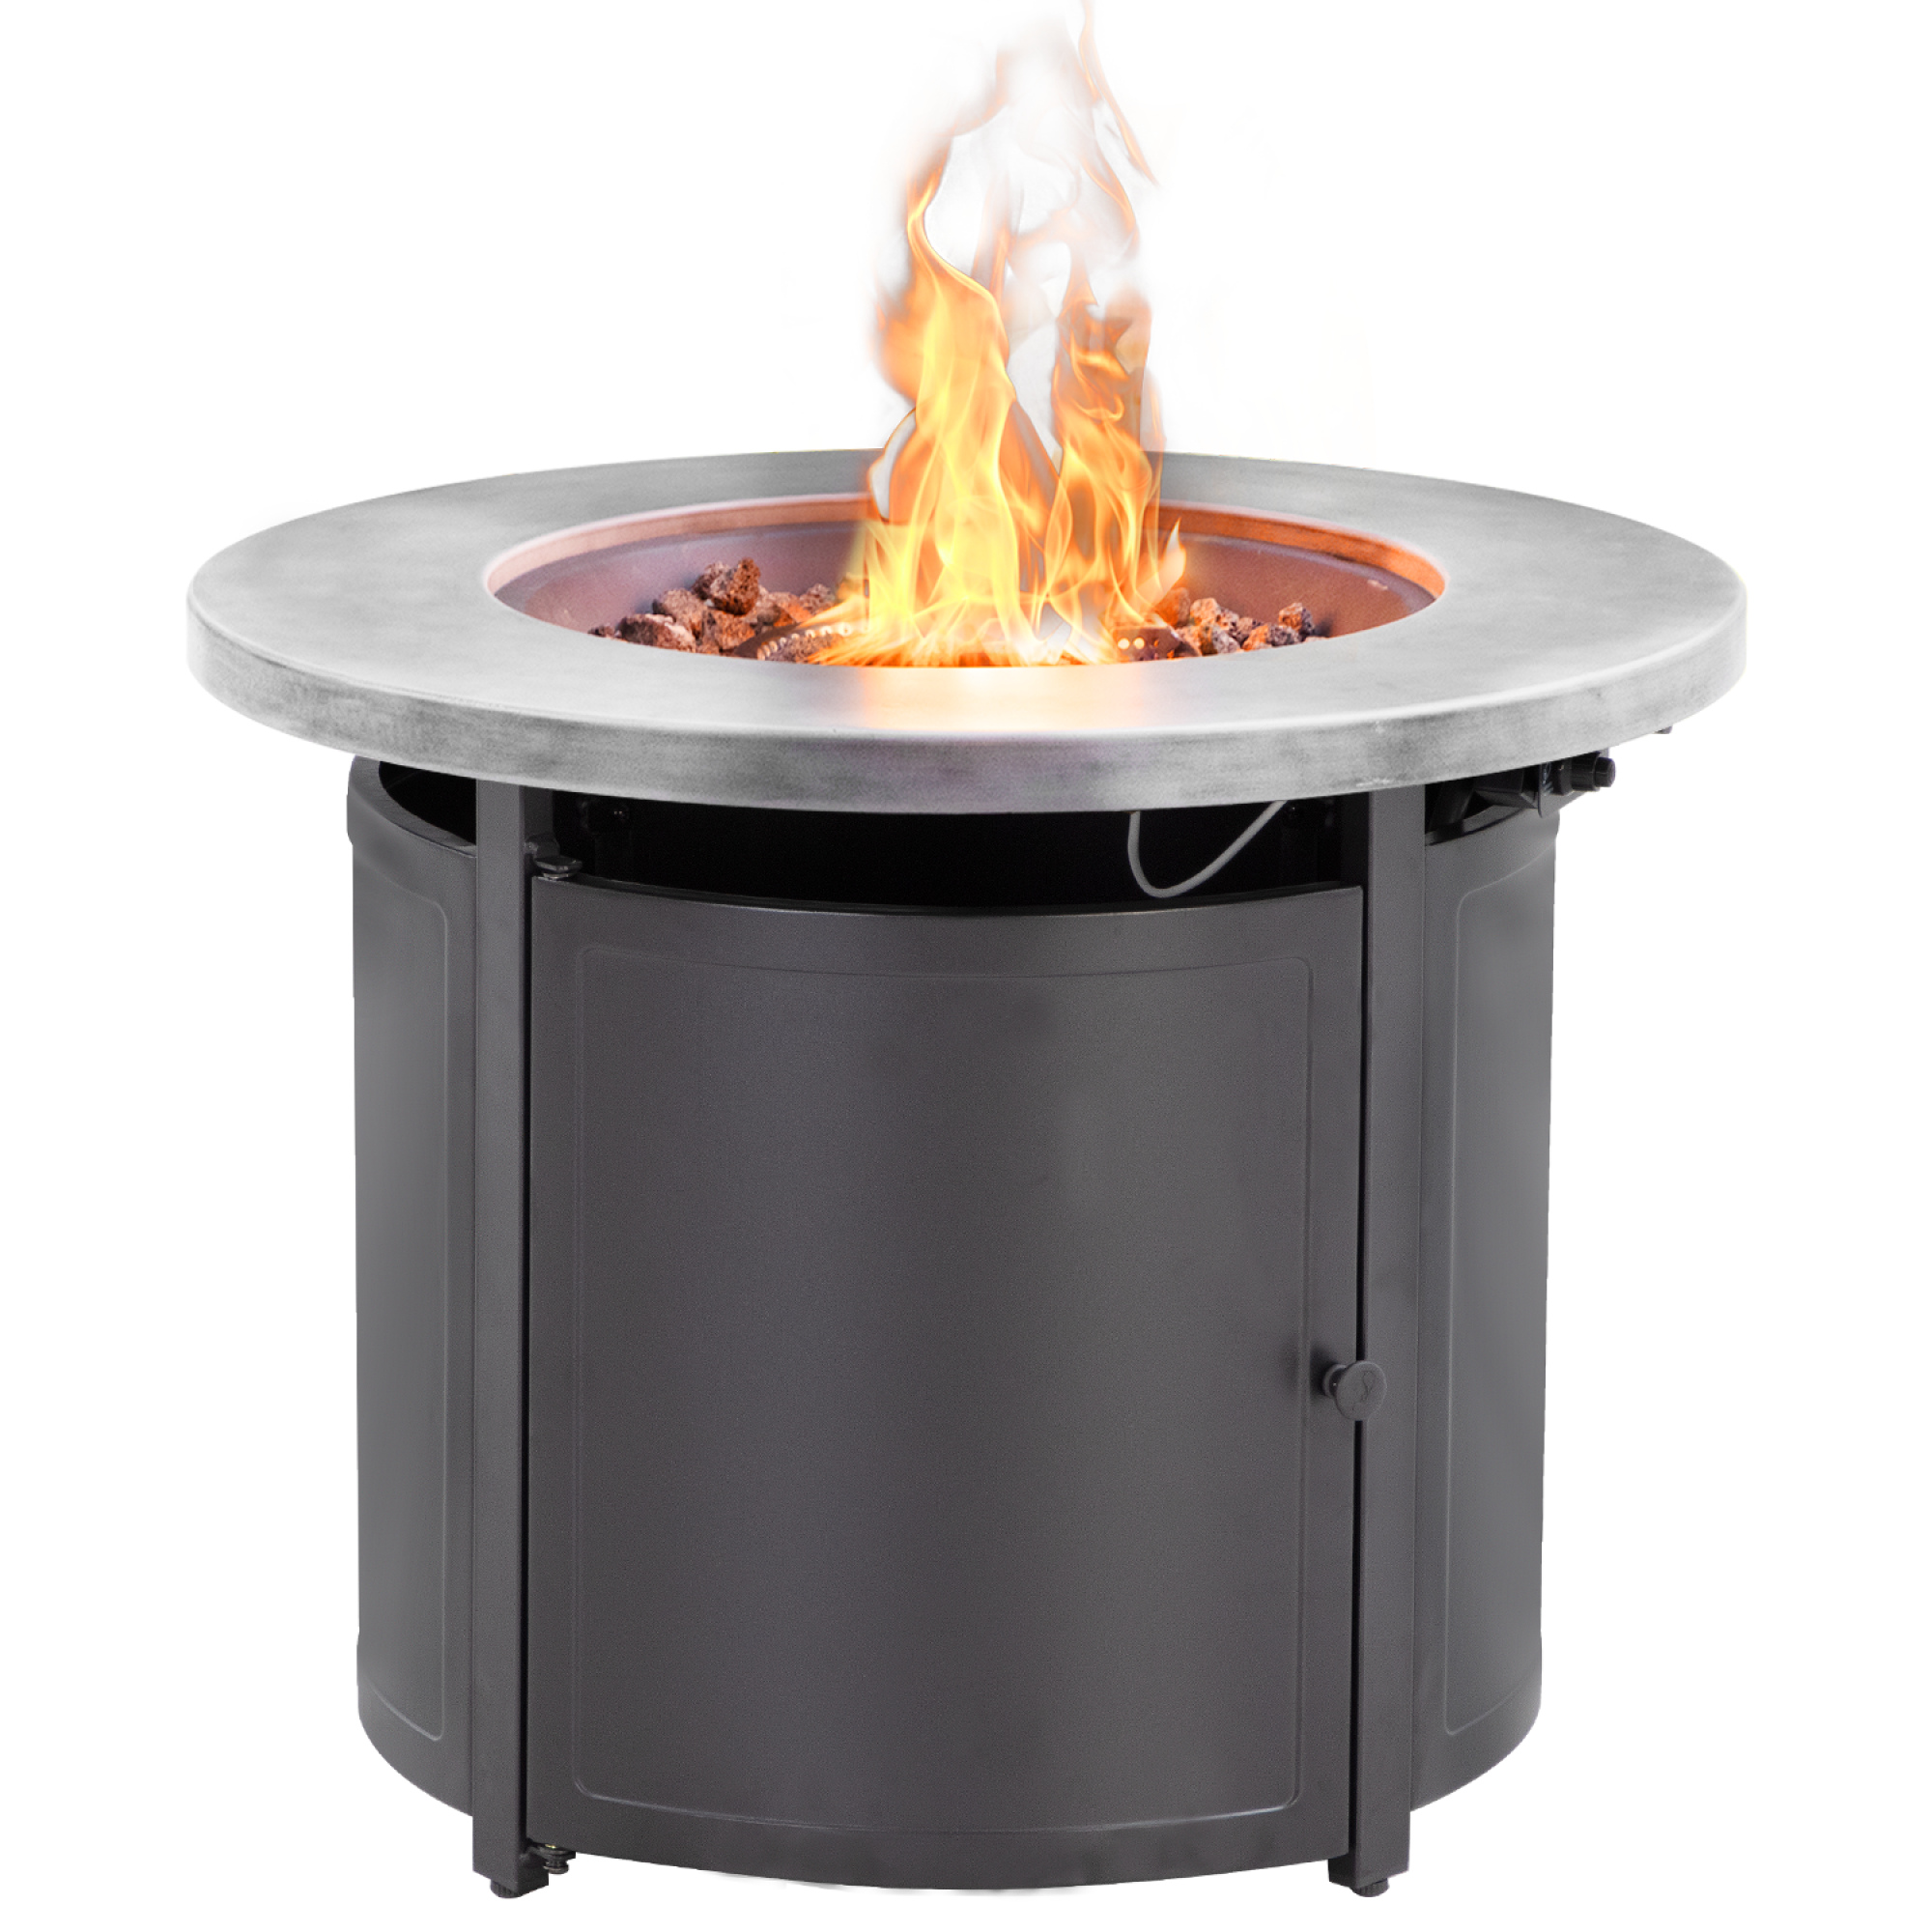 2022 LAUSAINT HOME Round Gas Fire Pit Table with Fire Stocks for Patio,55000 BTU Black Outdoor Propane Firepits,Auto-Ignition CSA Certification-Boyel Living